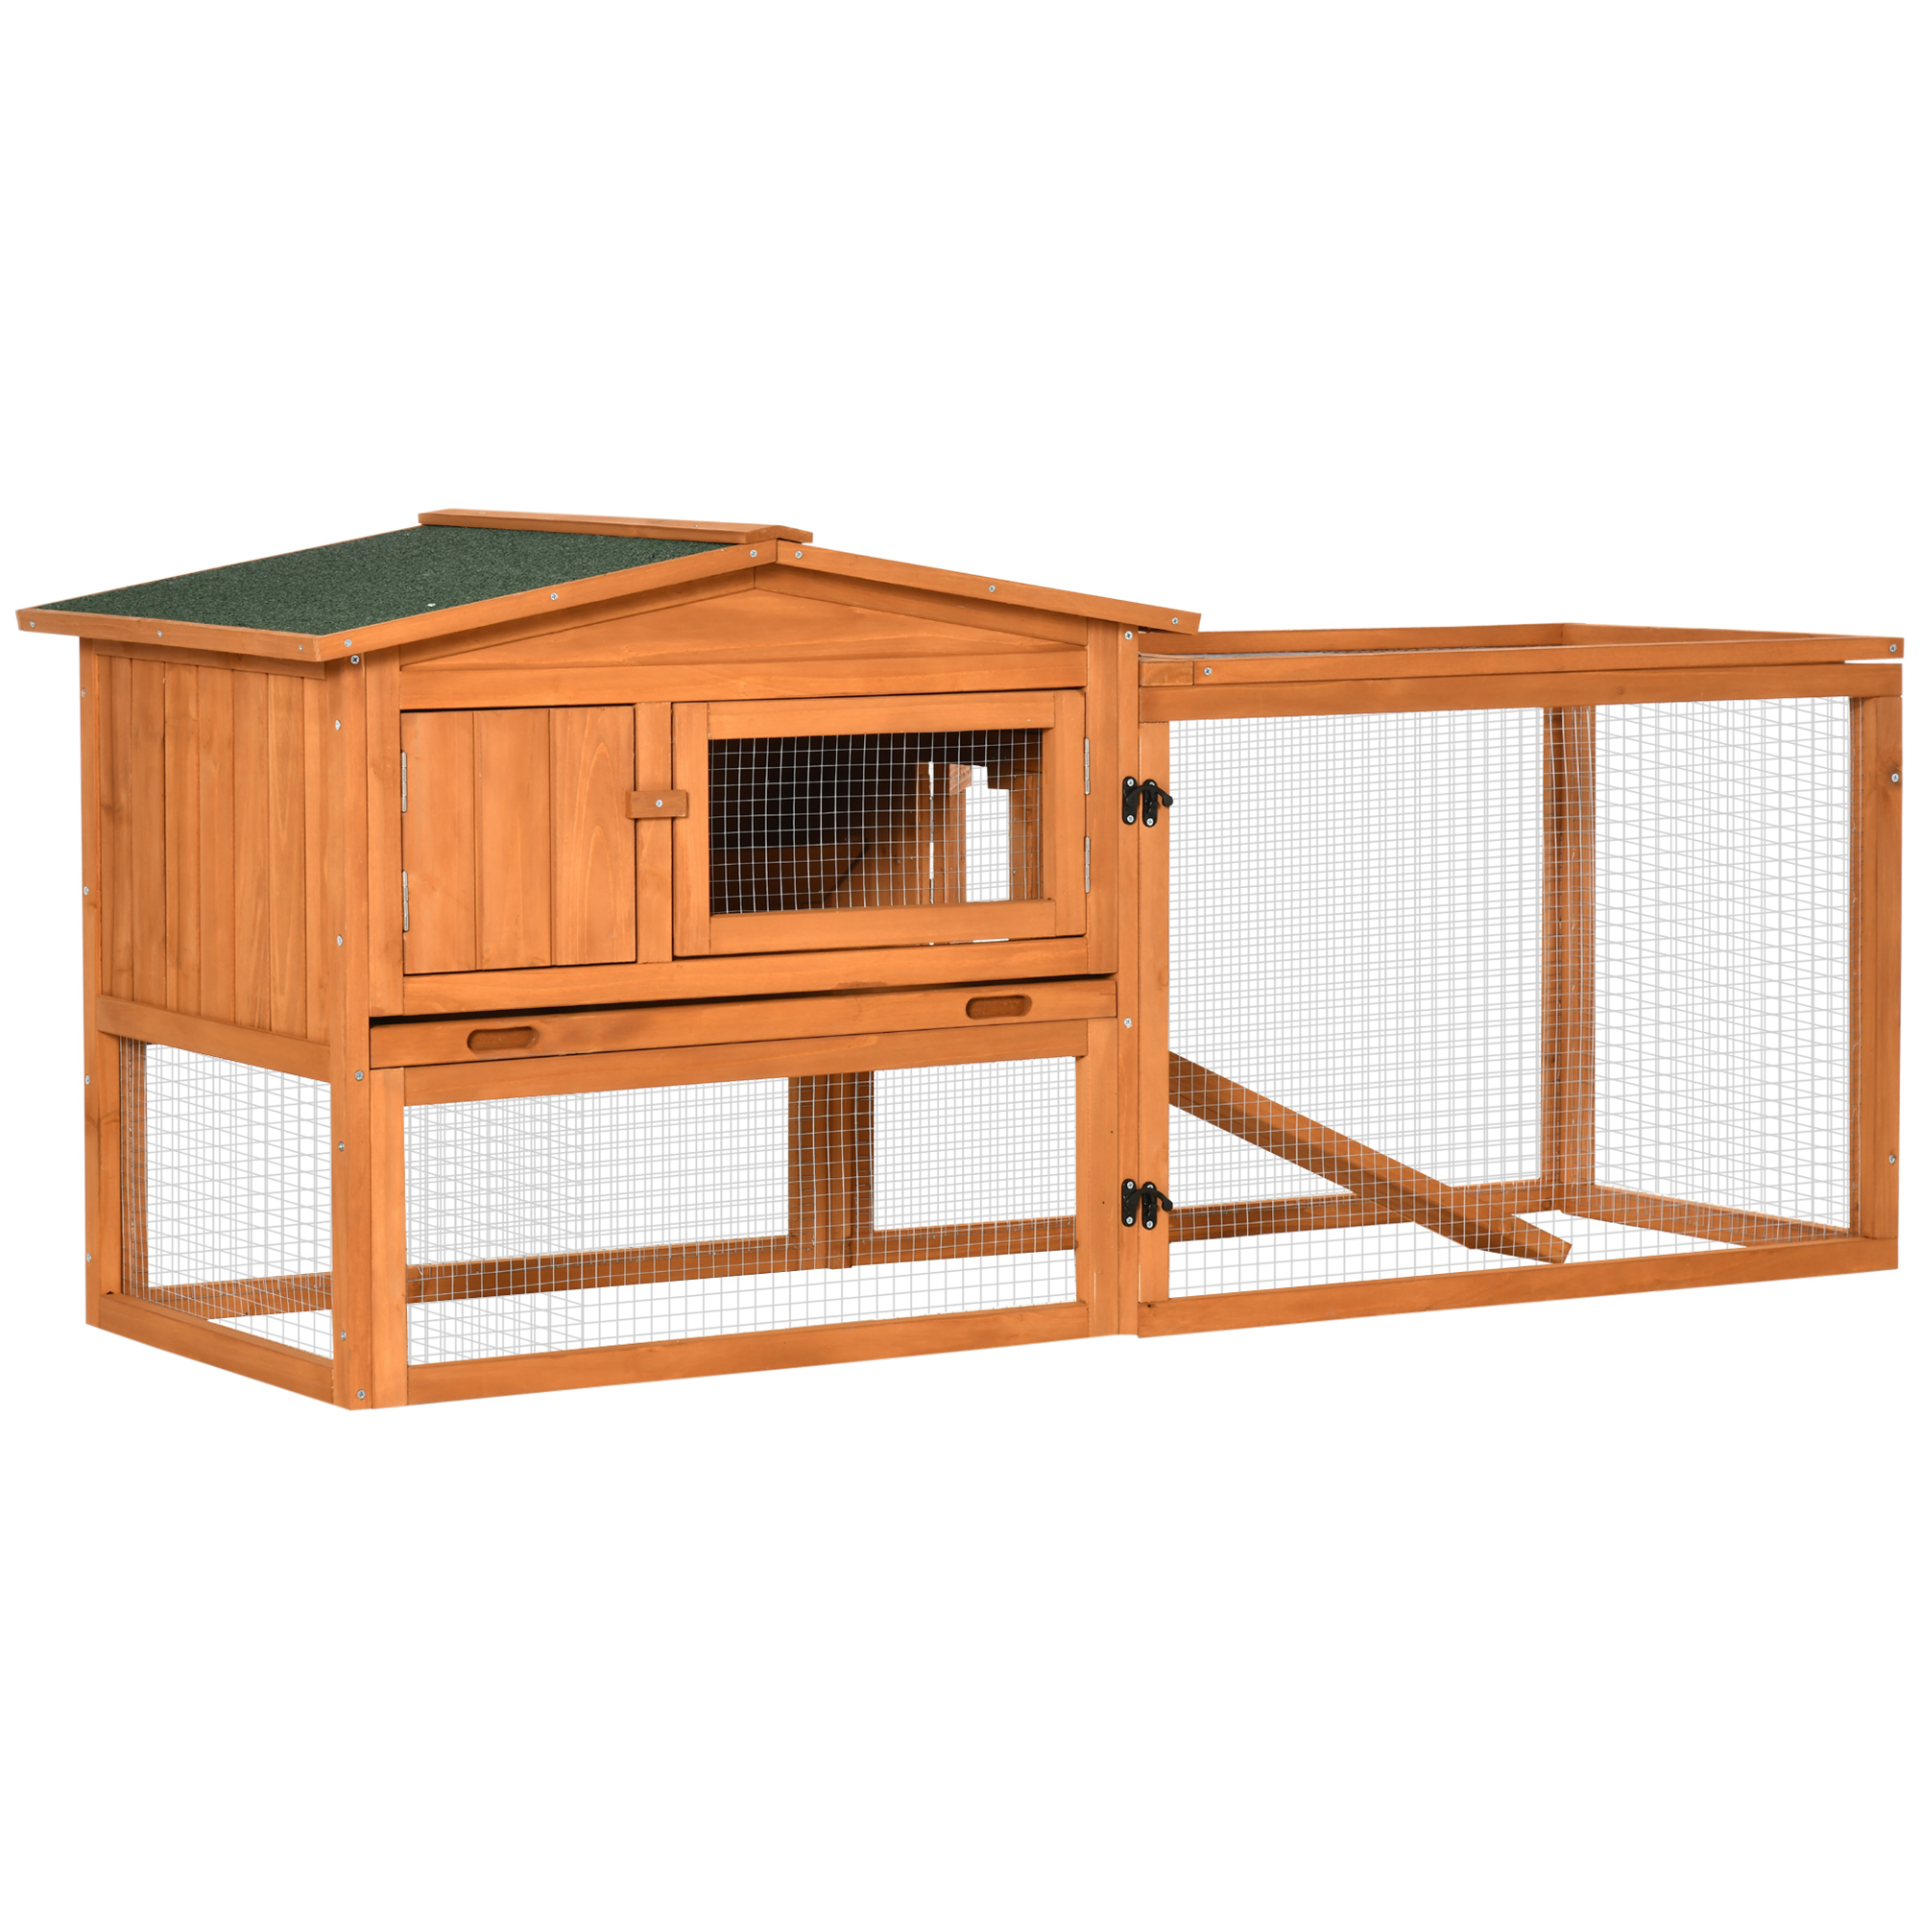 PawHut Rabbit Hutch and Run Outdoor Bunny Cage Wooden Guinea Pig Hide House with Sliding Tray, Hay Rack, Ramp, 156 x 58 x 68cm